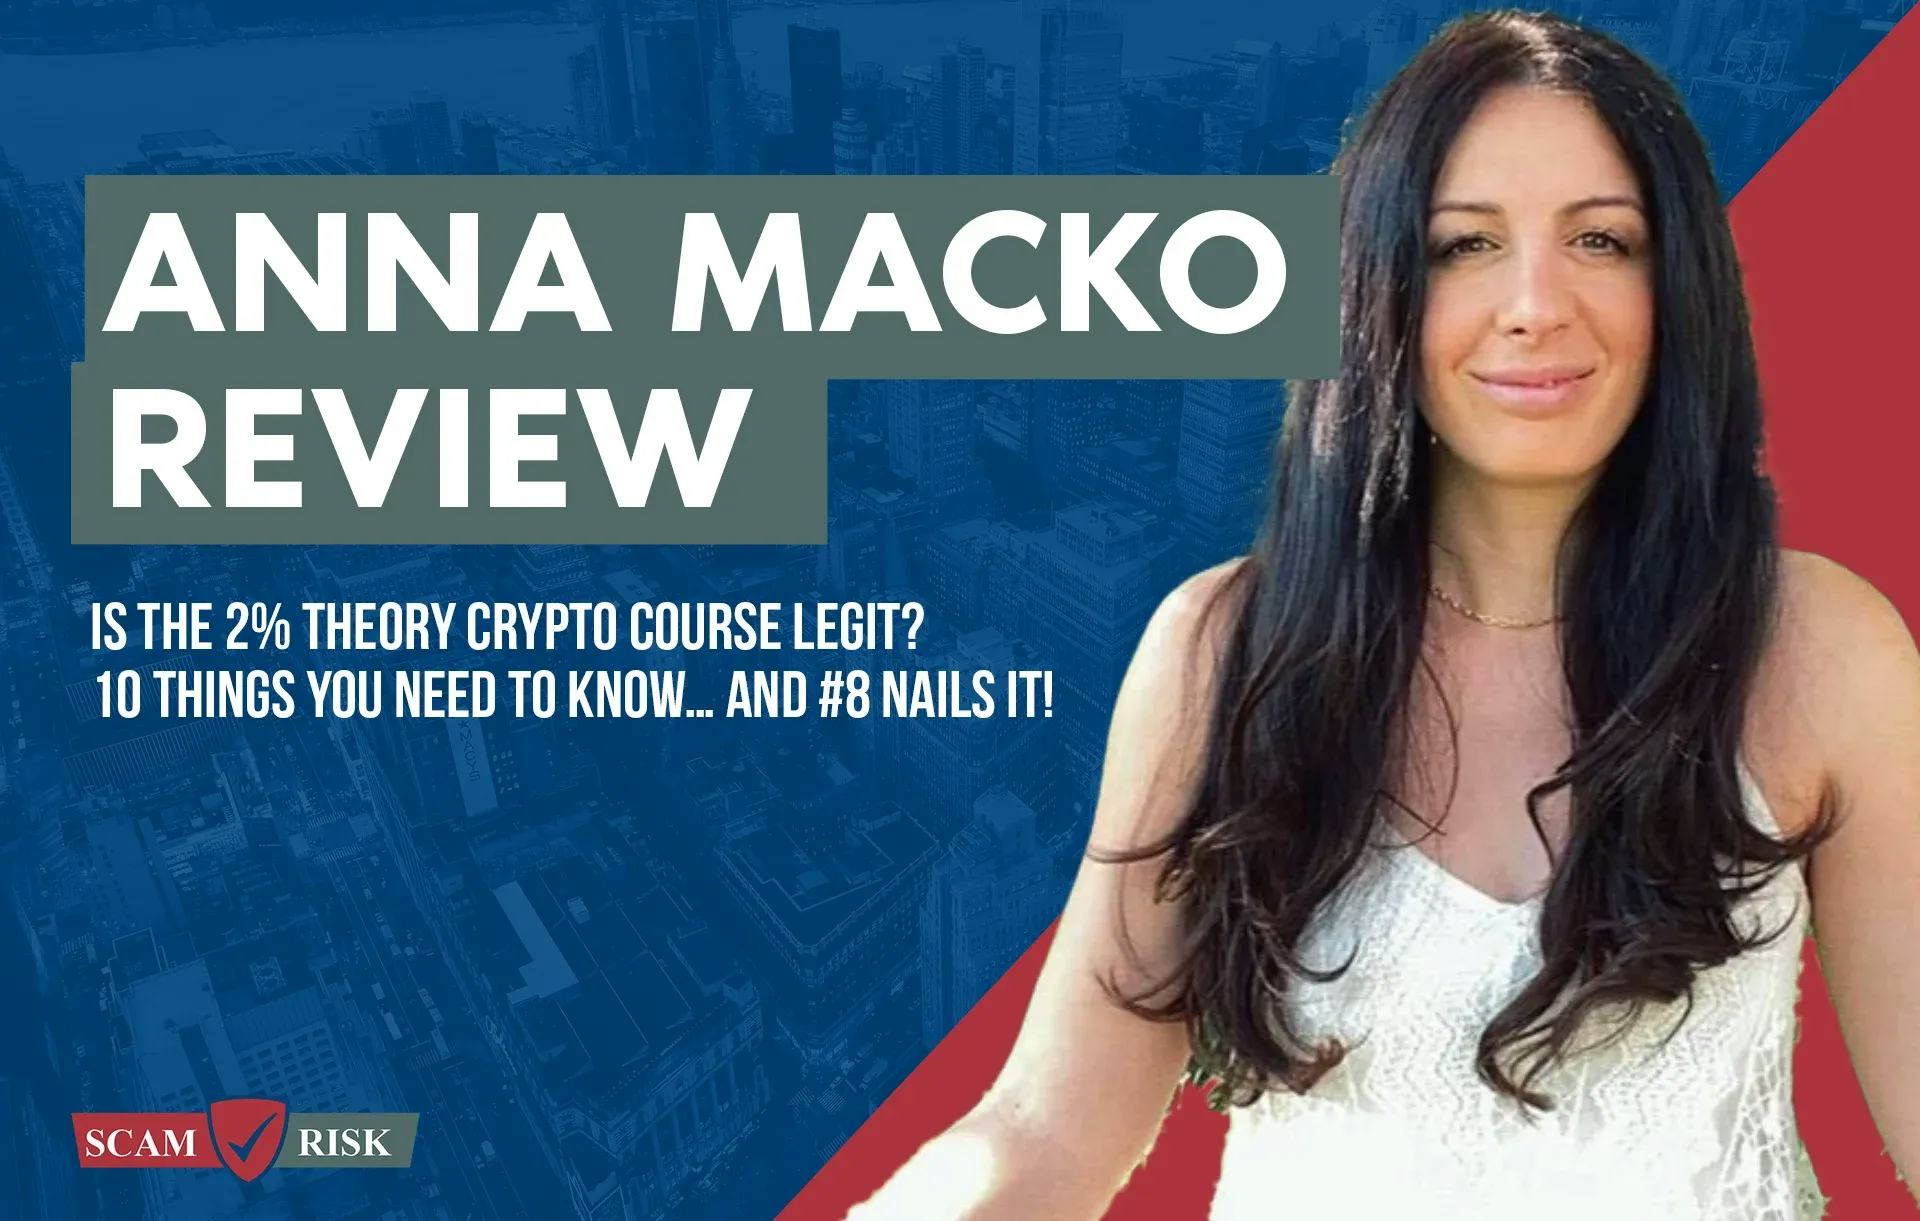 Anna Macko Review ([year] Update): Is The 2% Theory Crypto Course Legit?